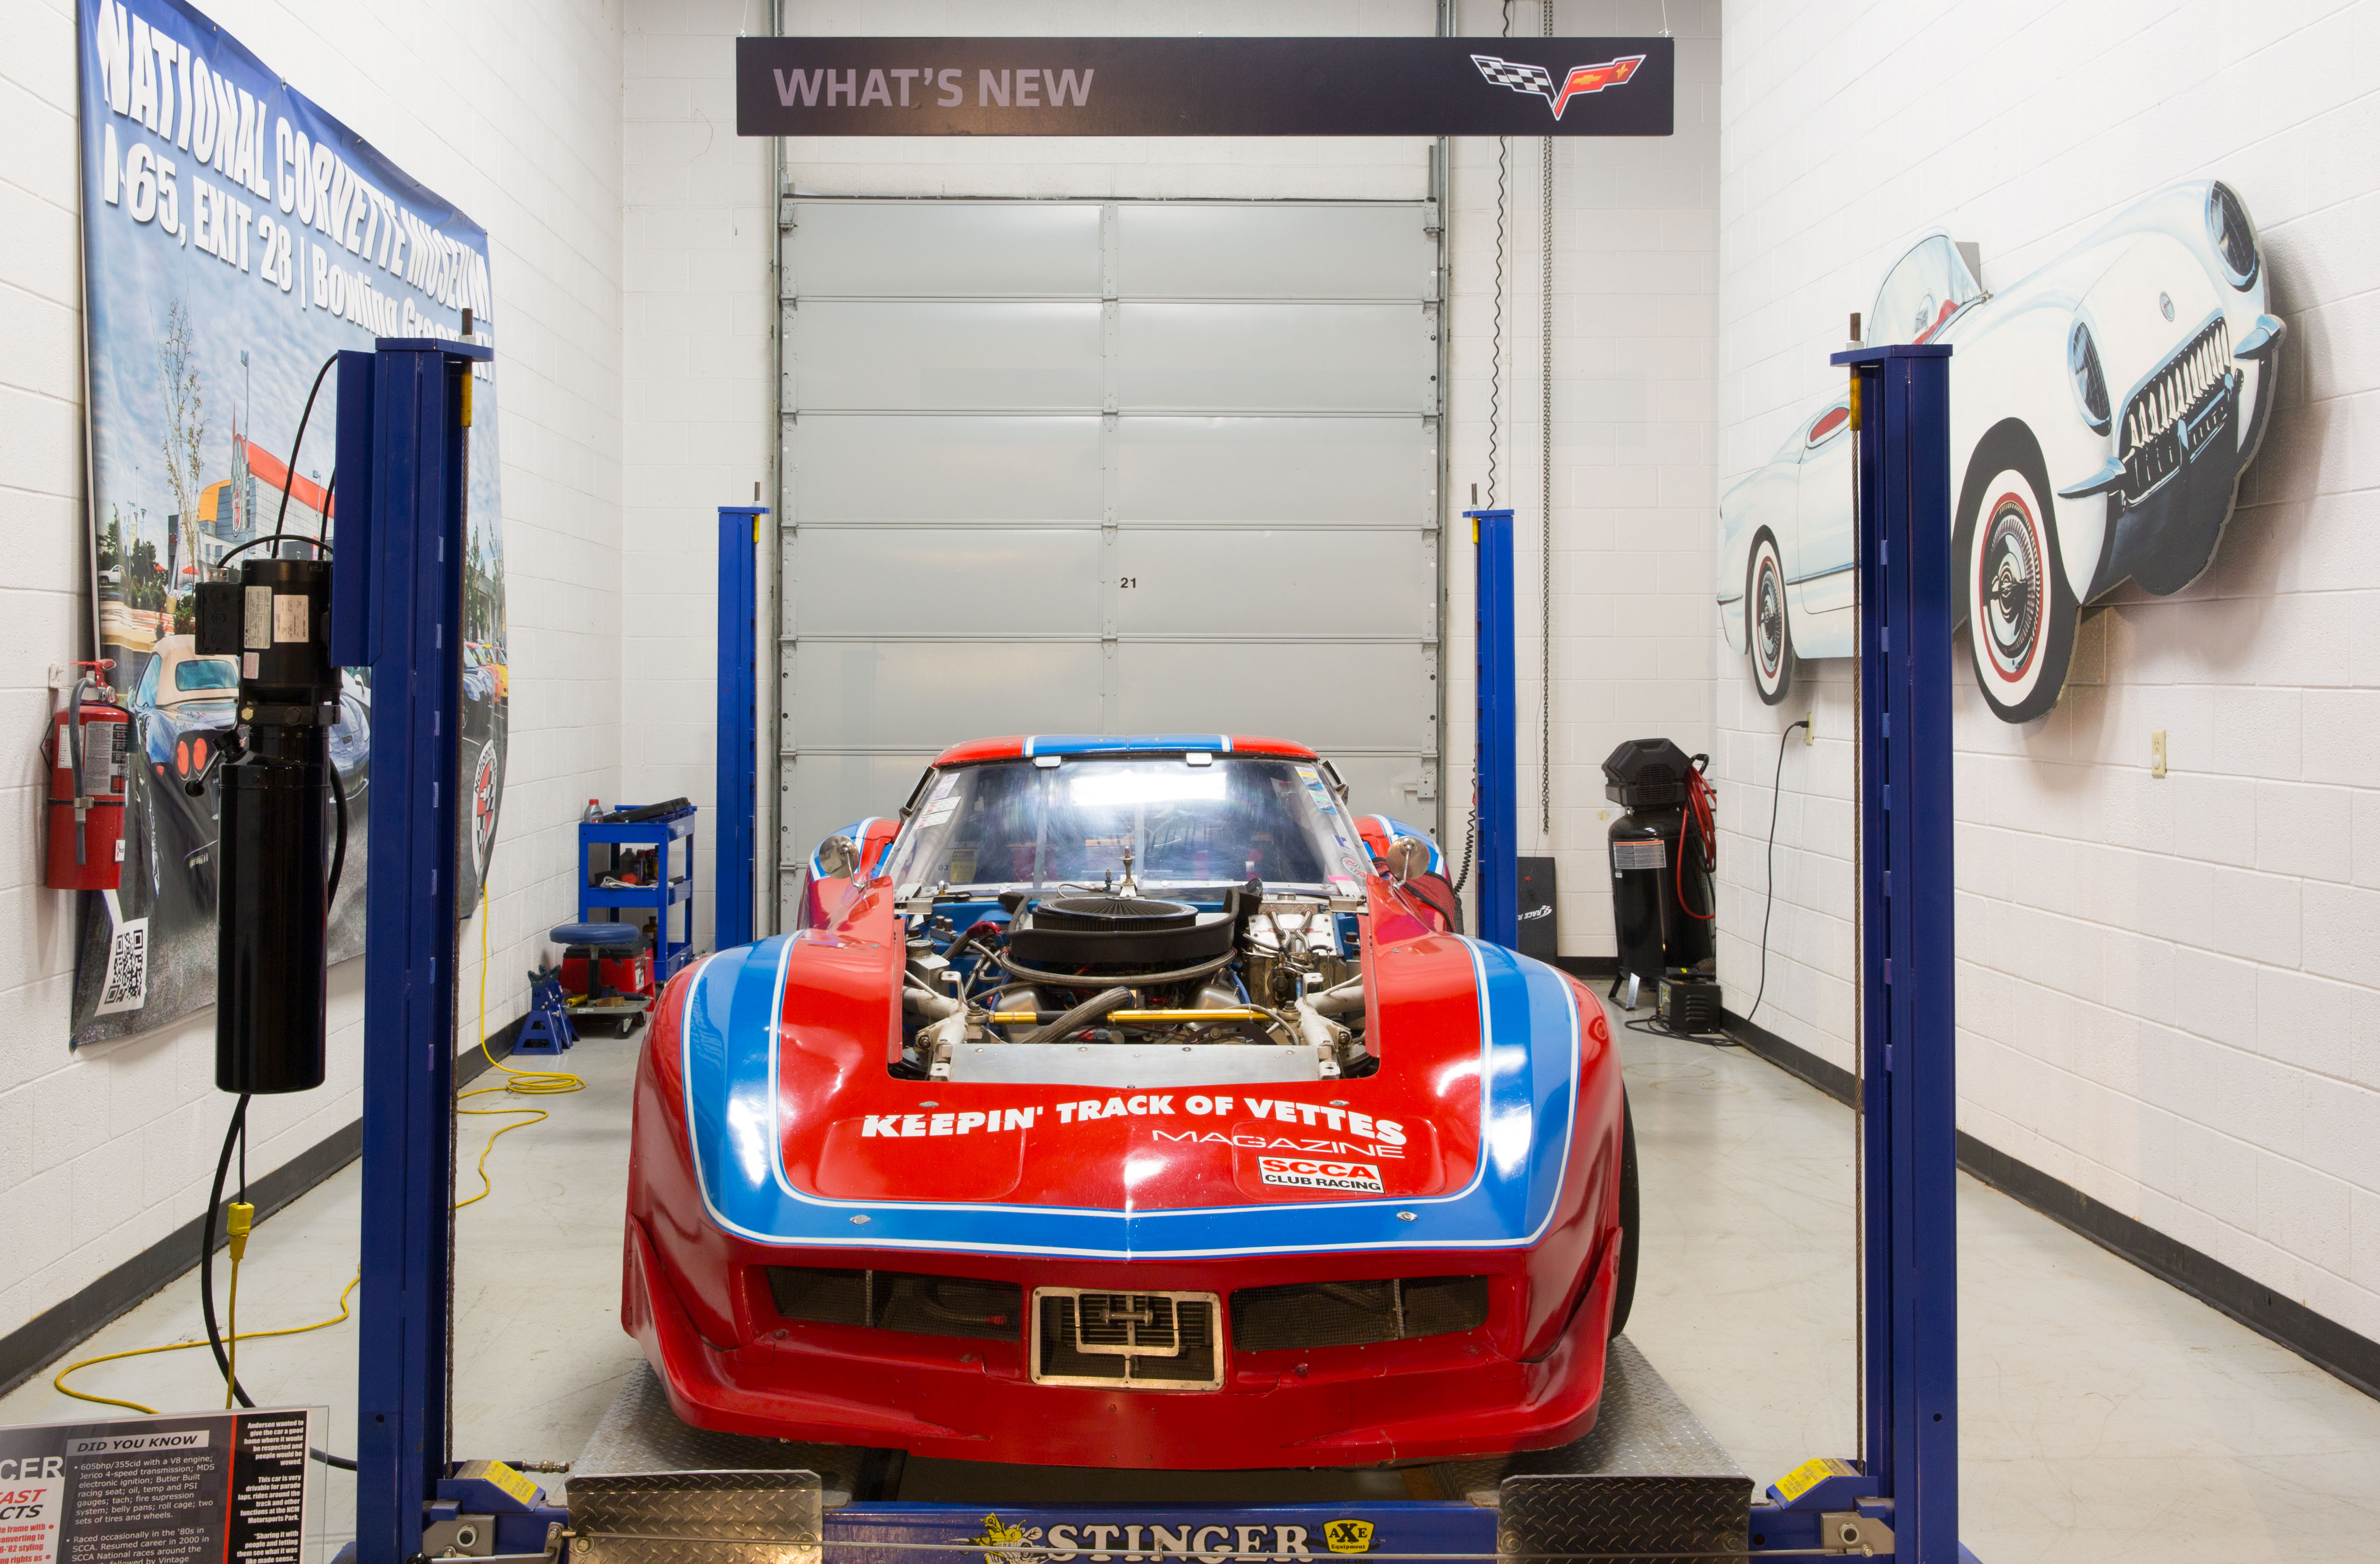 Adam's Polishes Named Official Car Care Product Provider of National  Corvette Museum's PDI Area - National Corvette Museum